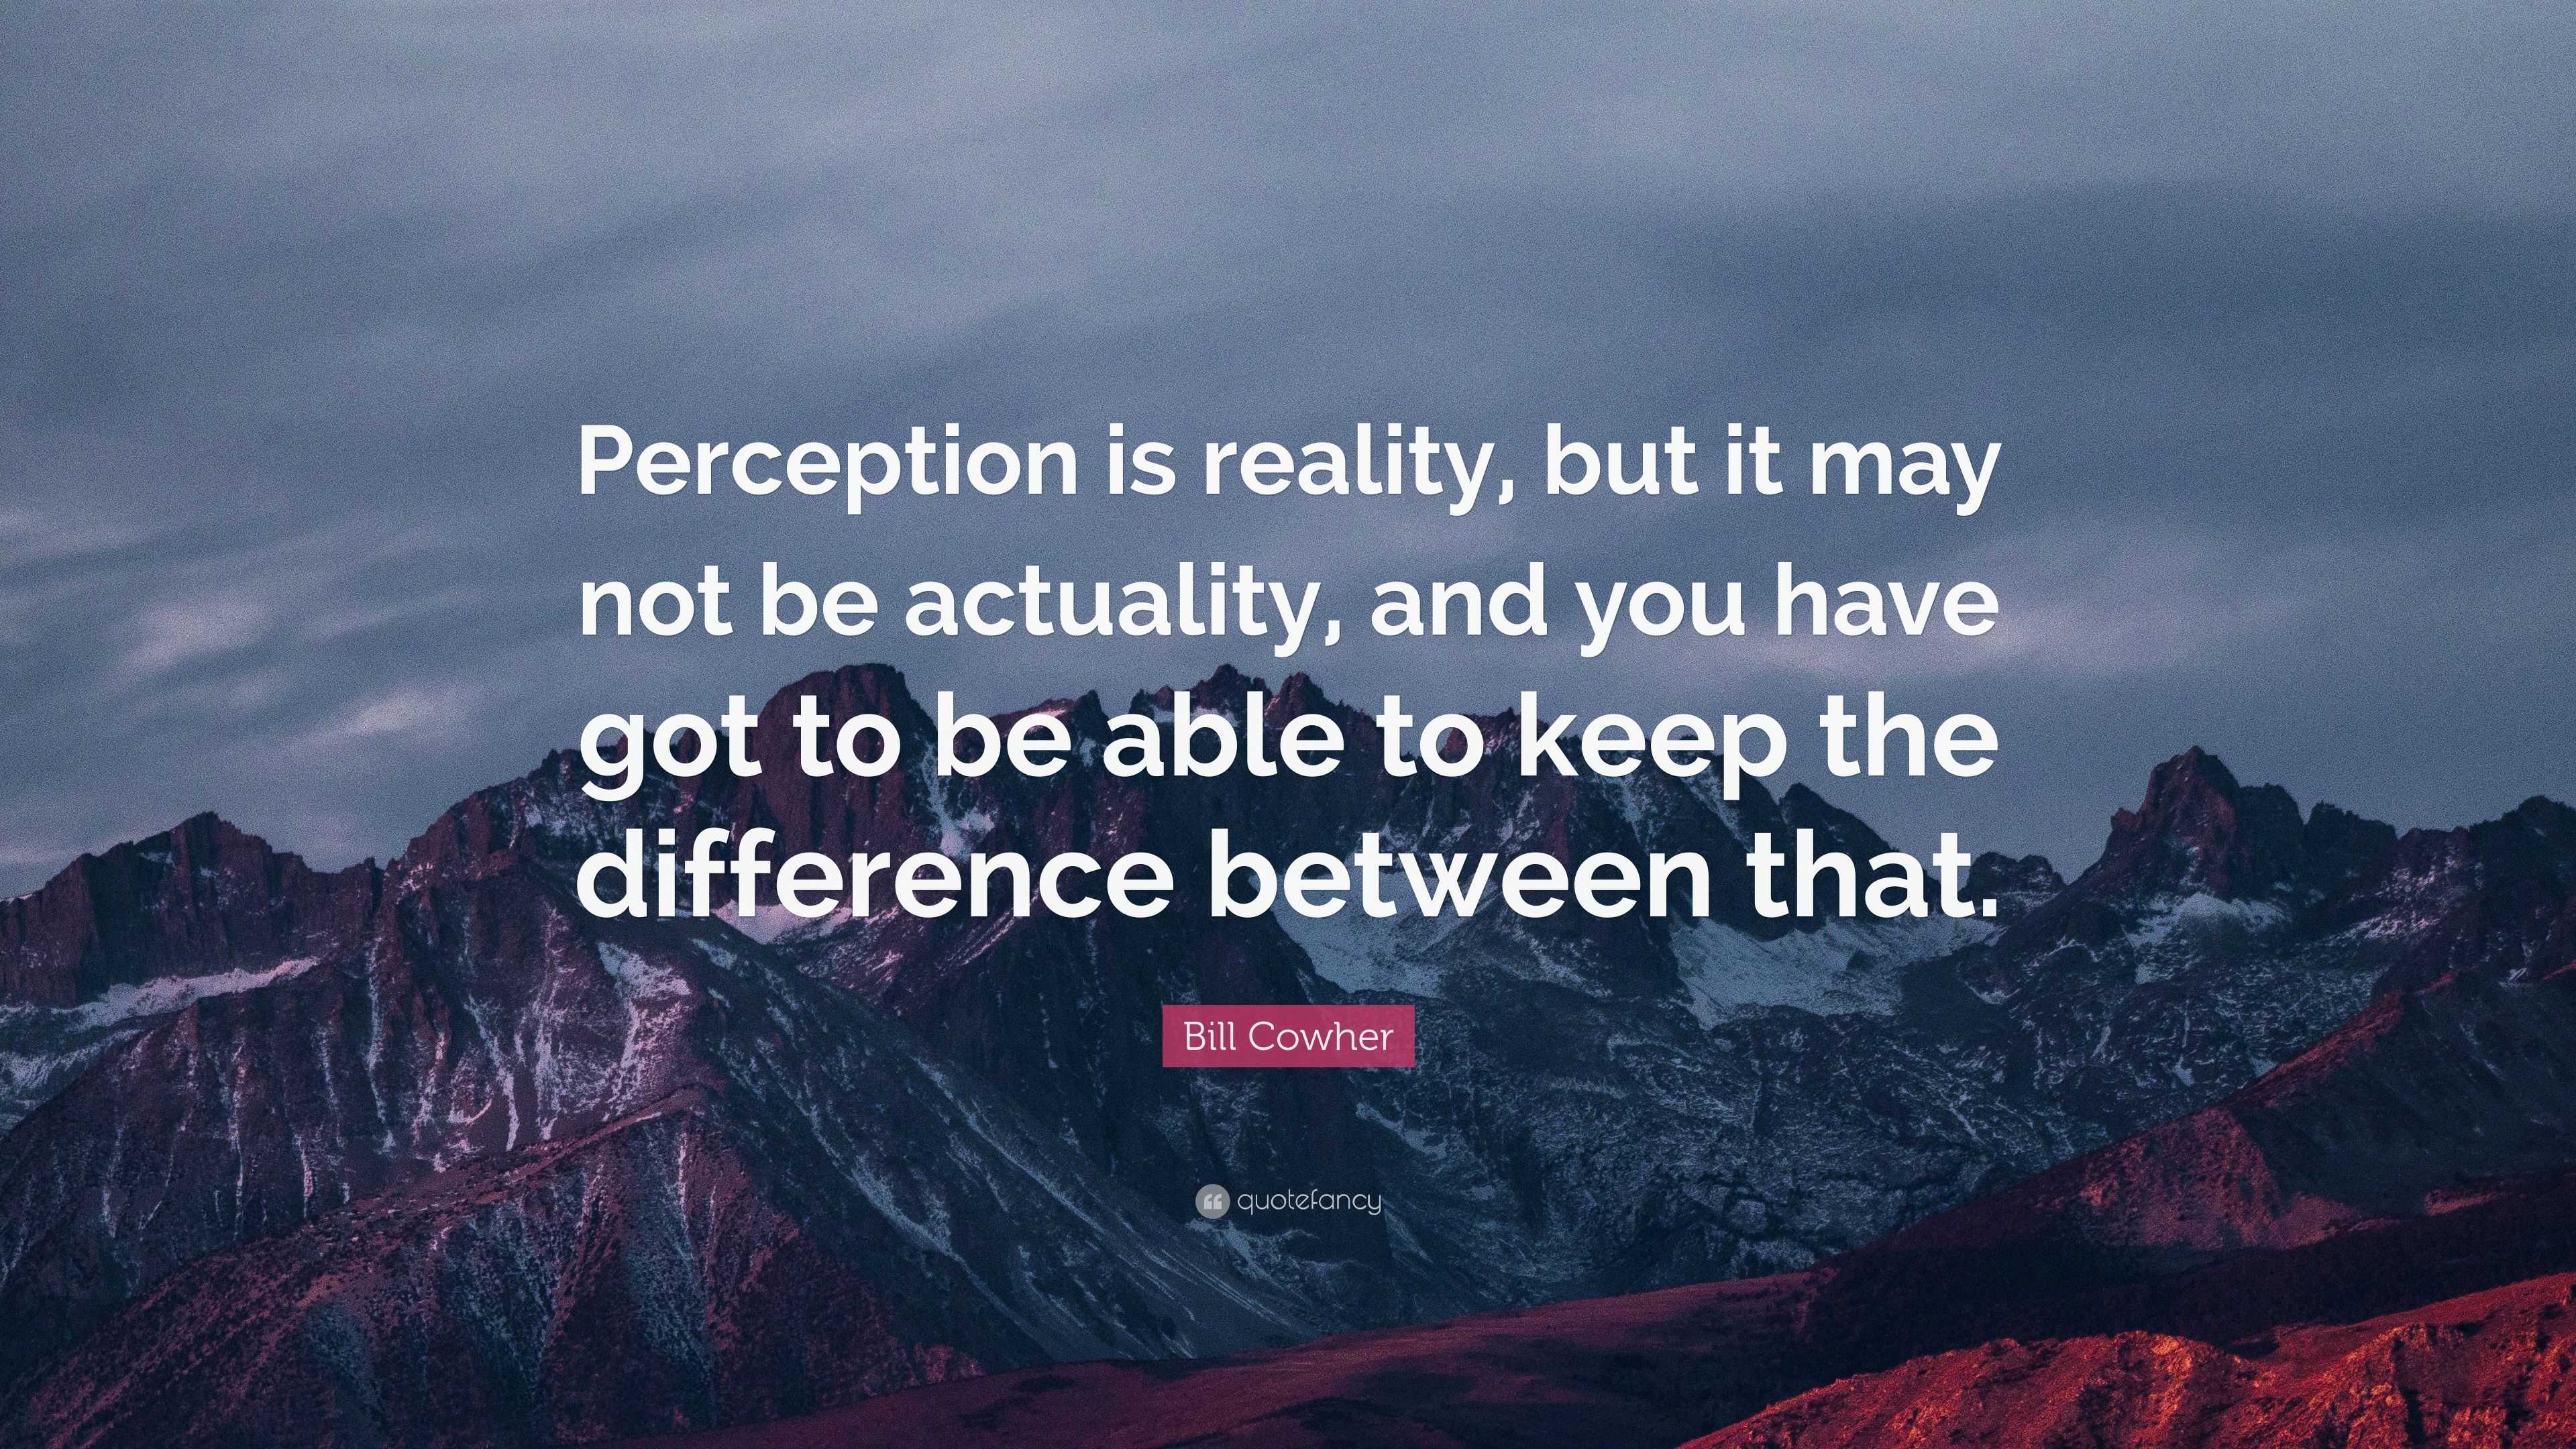 Bill Cowher Quote: “Perception is reality, but it may not be actuality ...